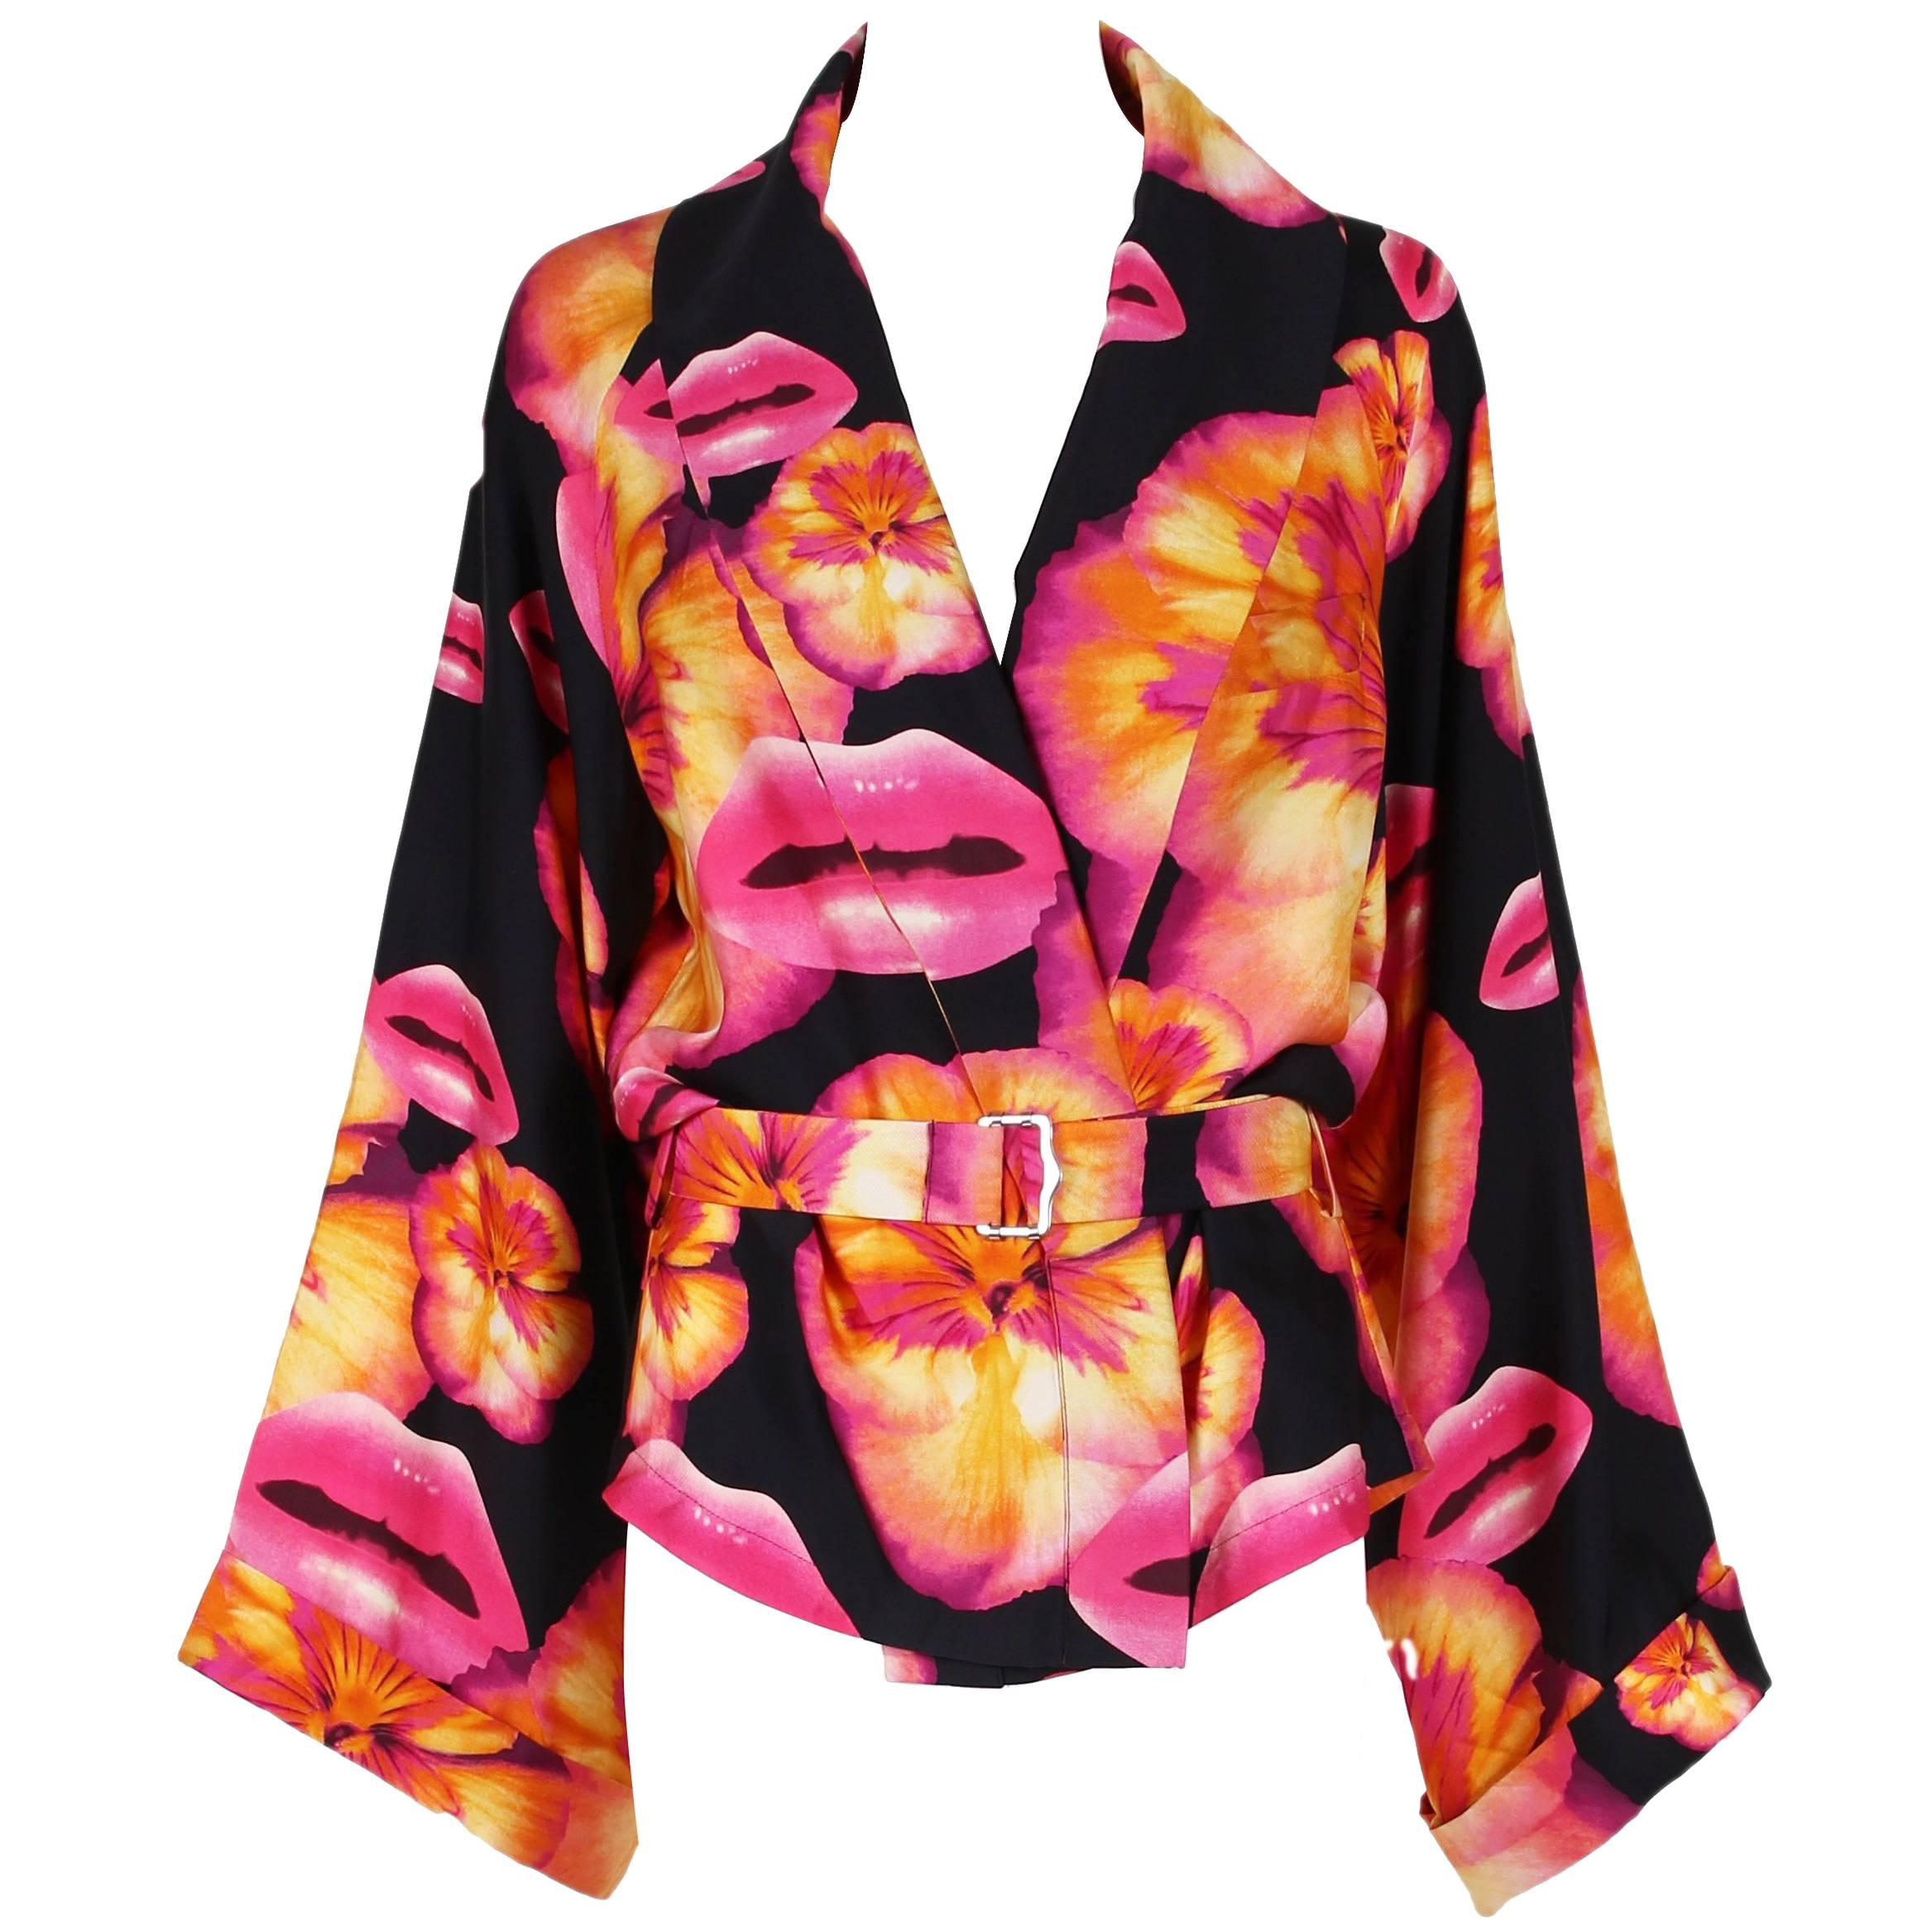 Christian Dior by Joh Galliano Silk Lip and Flower Print Kimono Style Top  Jacket at 1stDibs | dior joh, dior kimono jacket, dior flower jacket